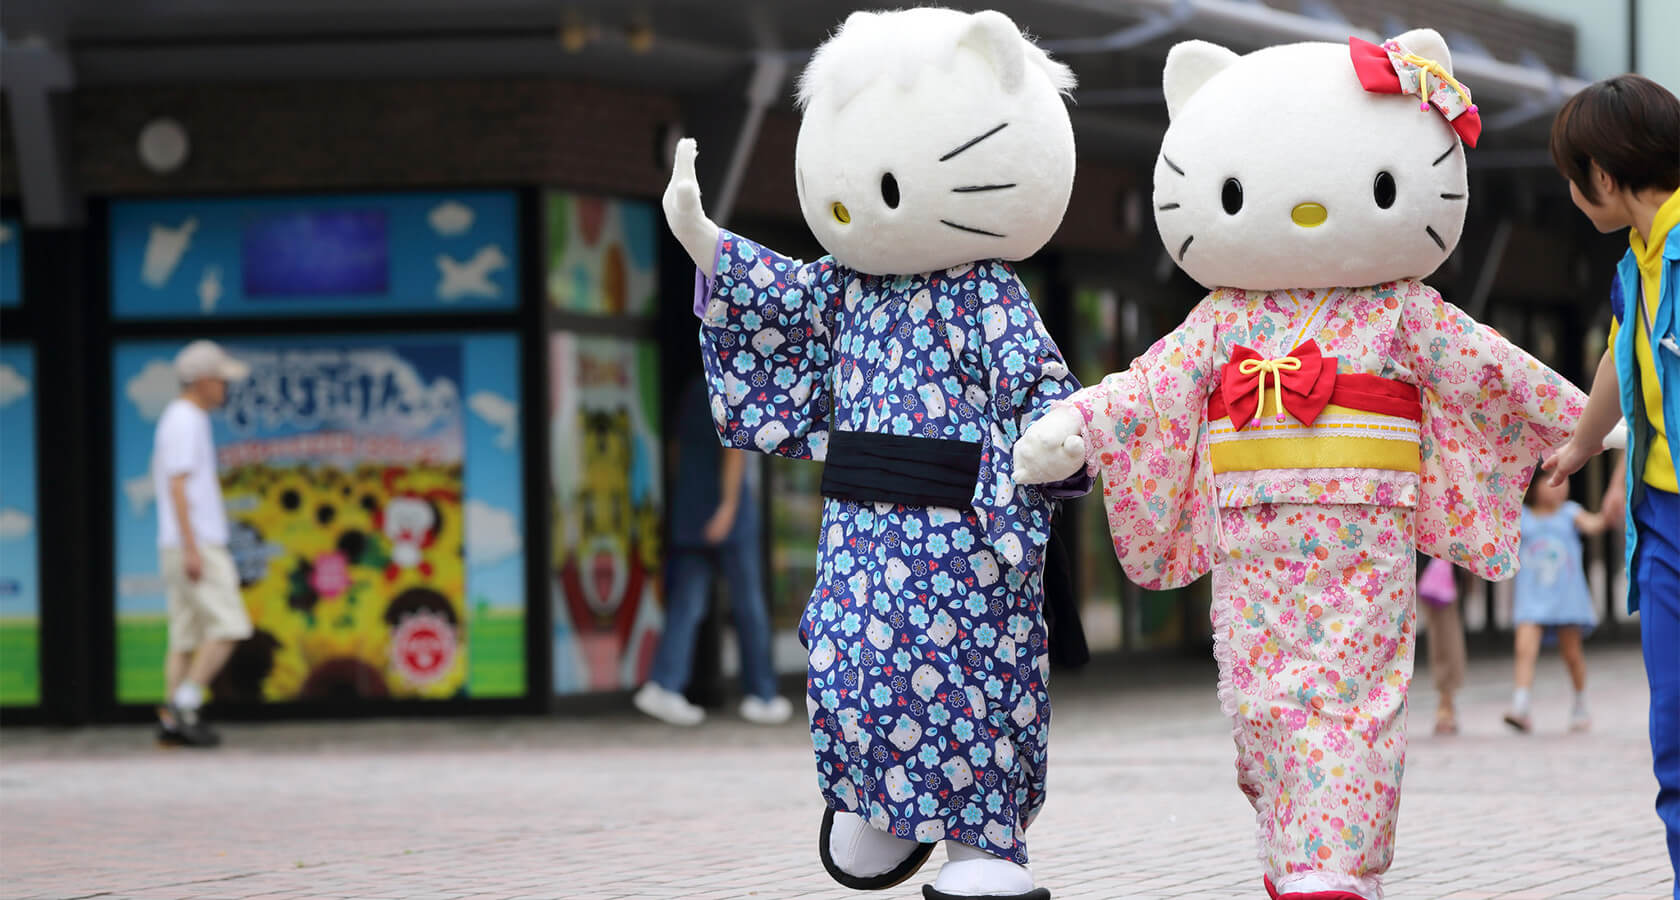 Sanrio Puroland: Visit a Park with Hello Kitty and Friends - Tokyo.com